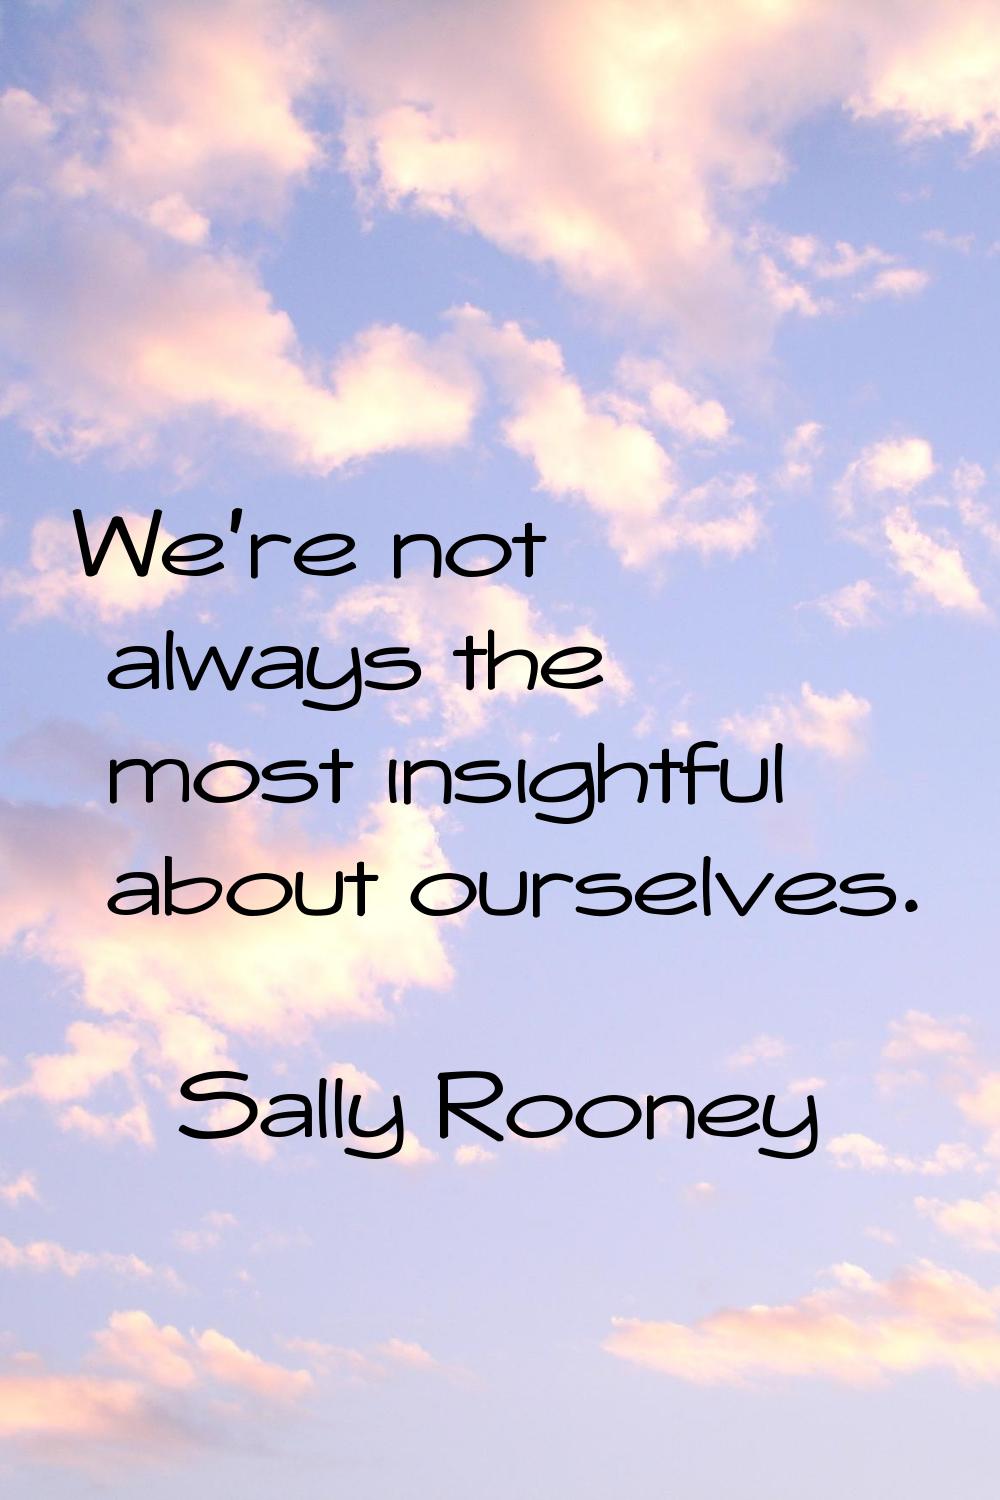 We're not always the most insightful about ourselves.